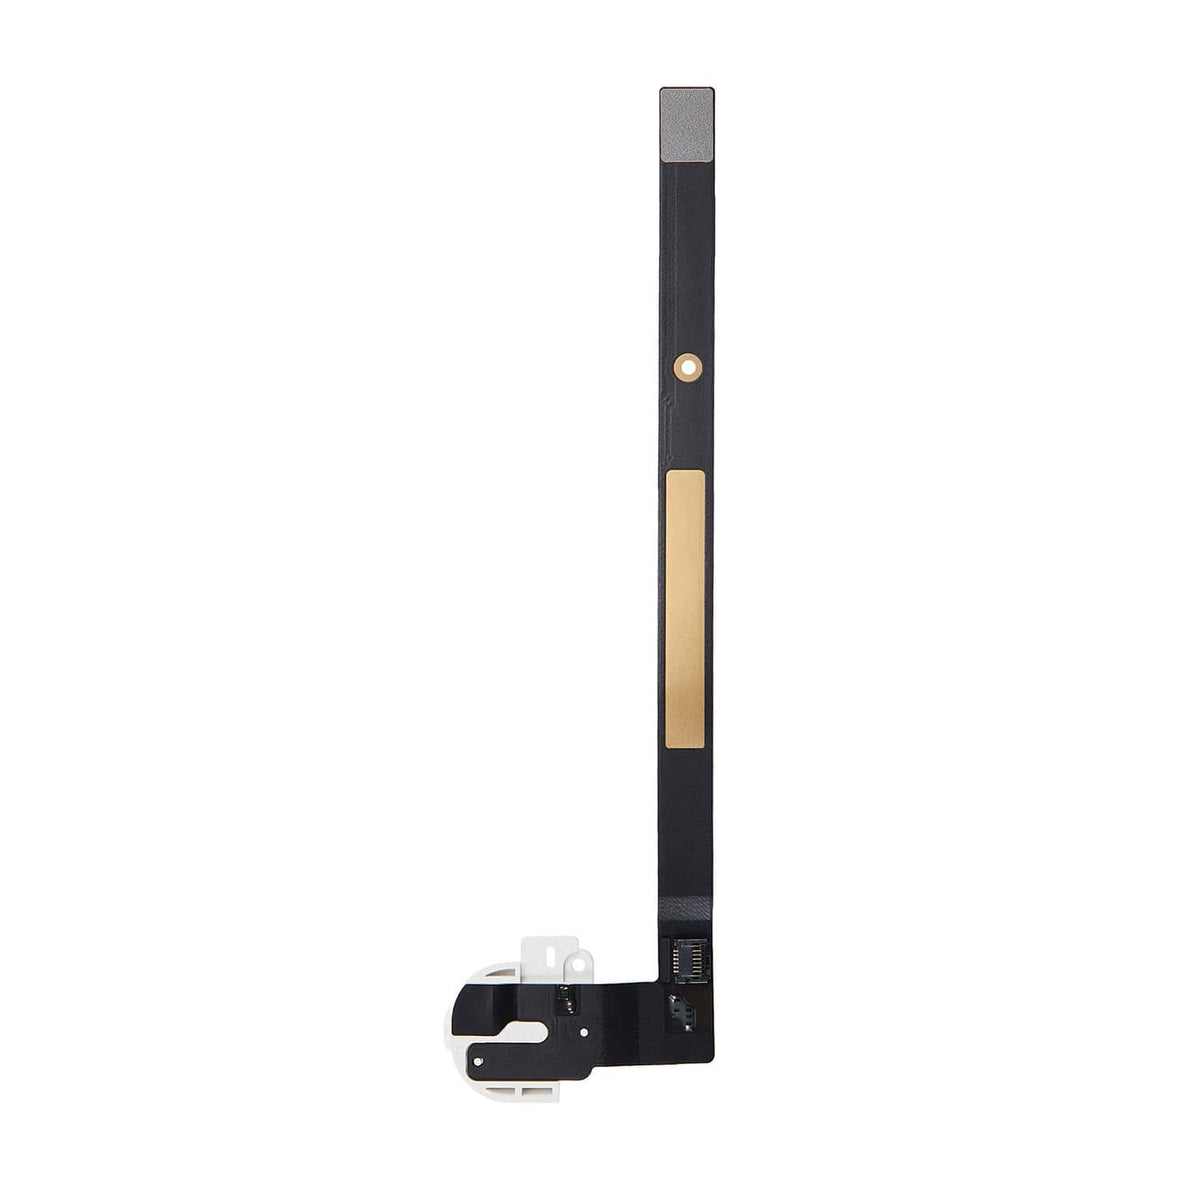 WHITE HEADPHONE JACK FLEX CABLE - WIFI VERSION FOR IPAD 9TH